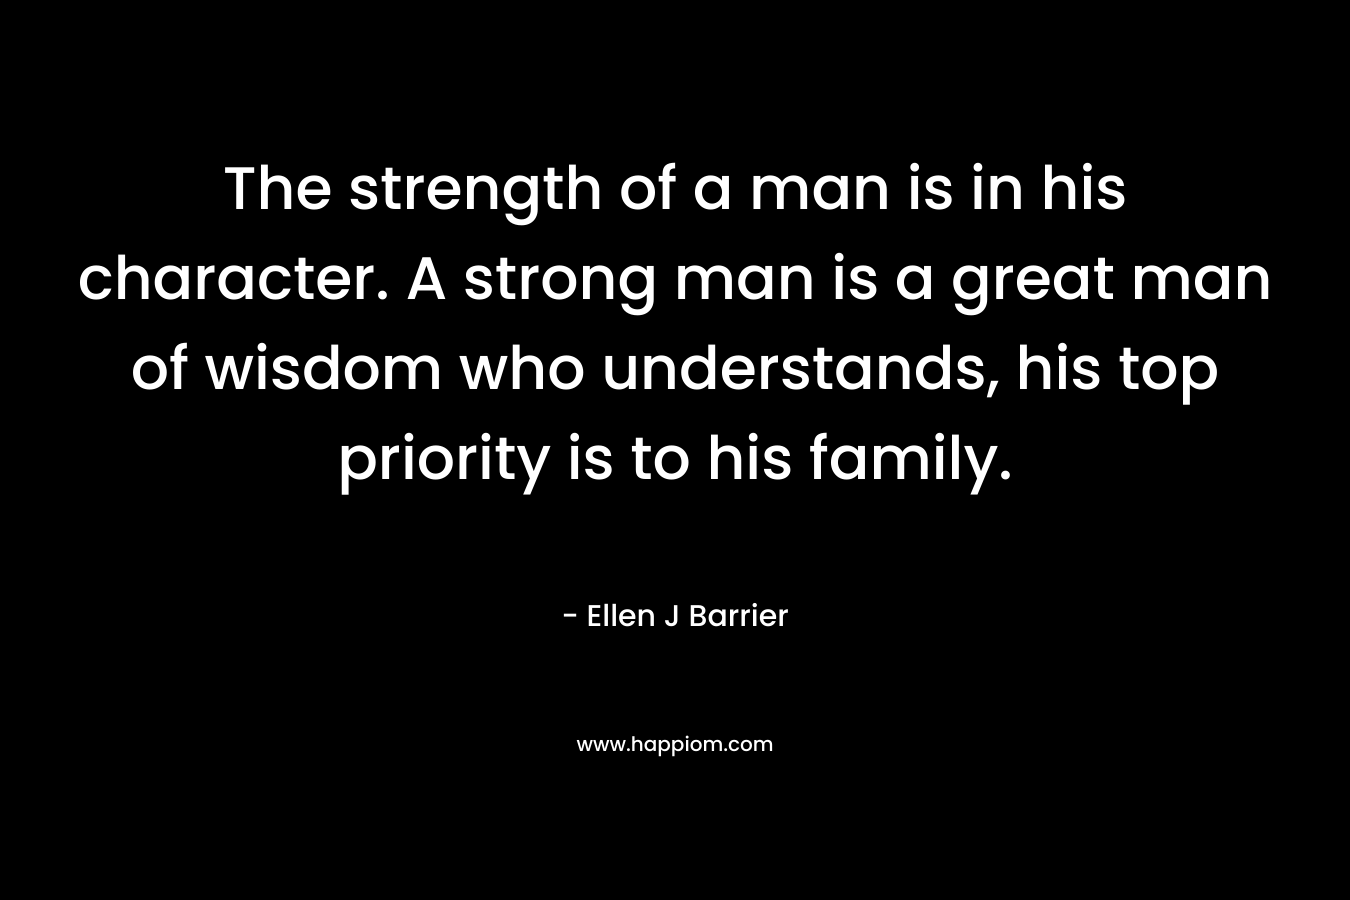 The strength of a man is in his character. A strong man is a great man of wisdom who understands, his top priority is to his family.